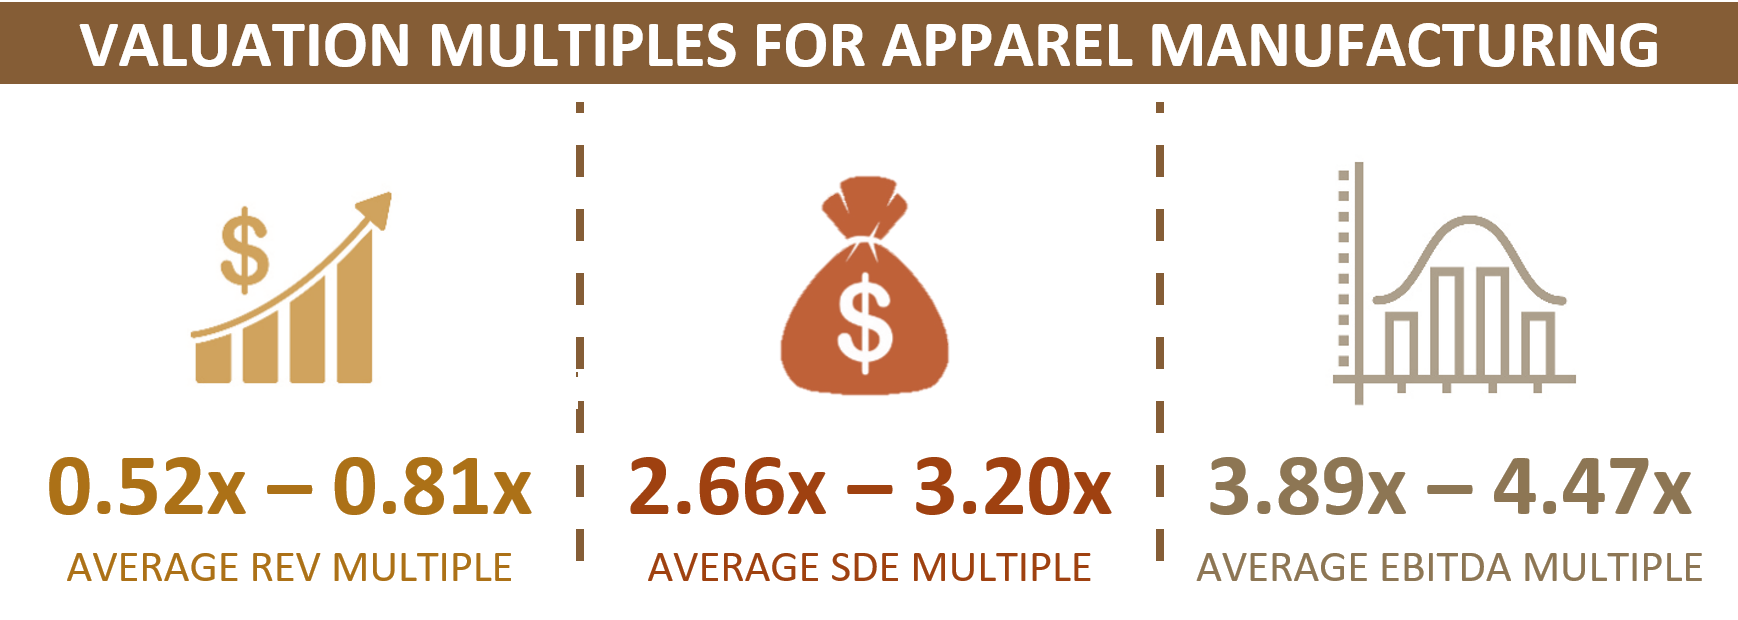 Valuation Multiples For Apparel Manufacturing